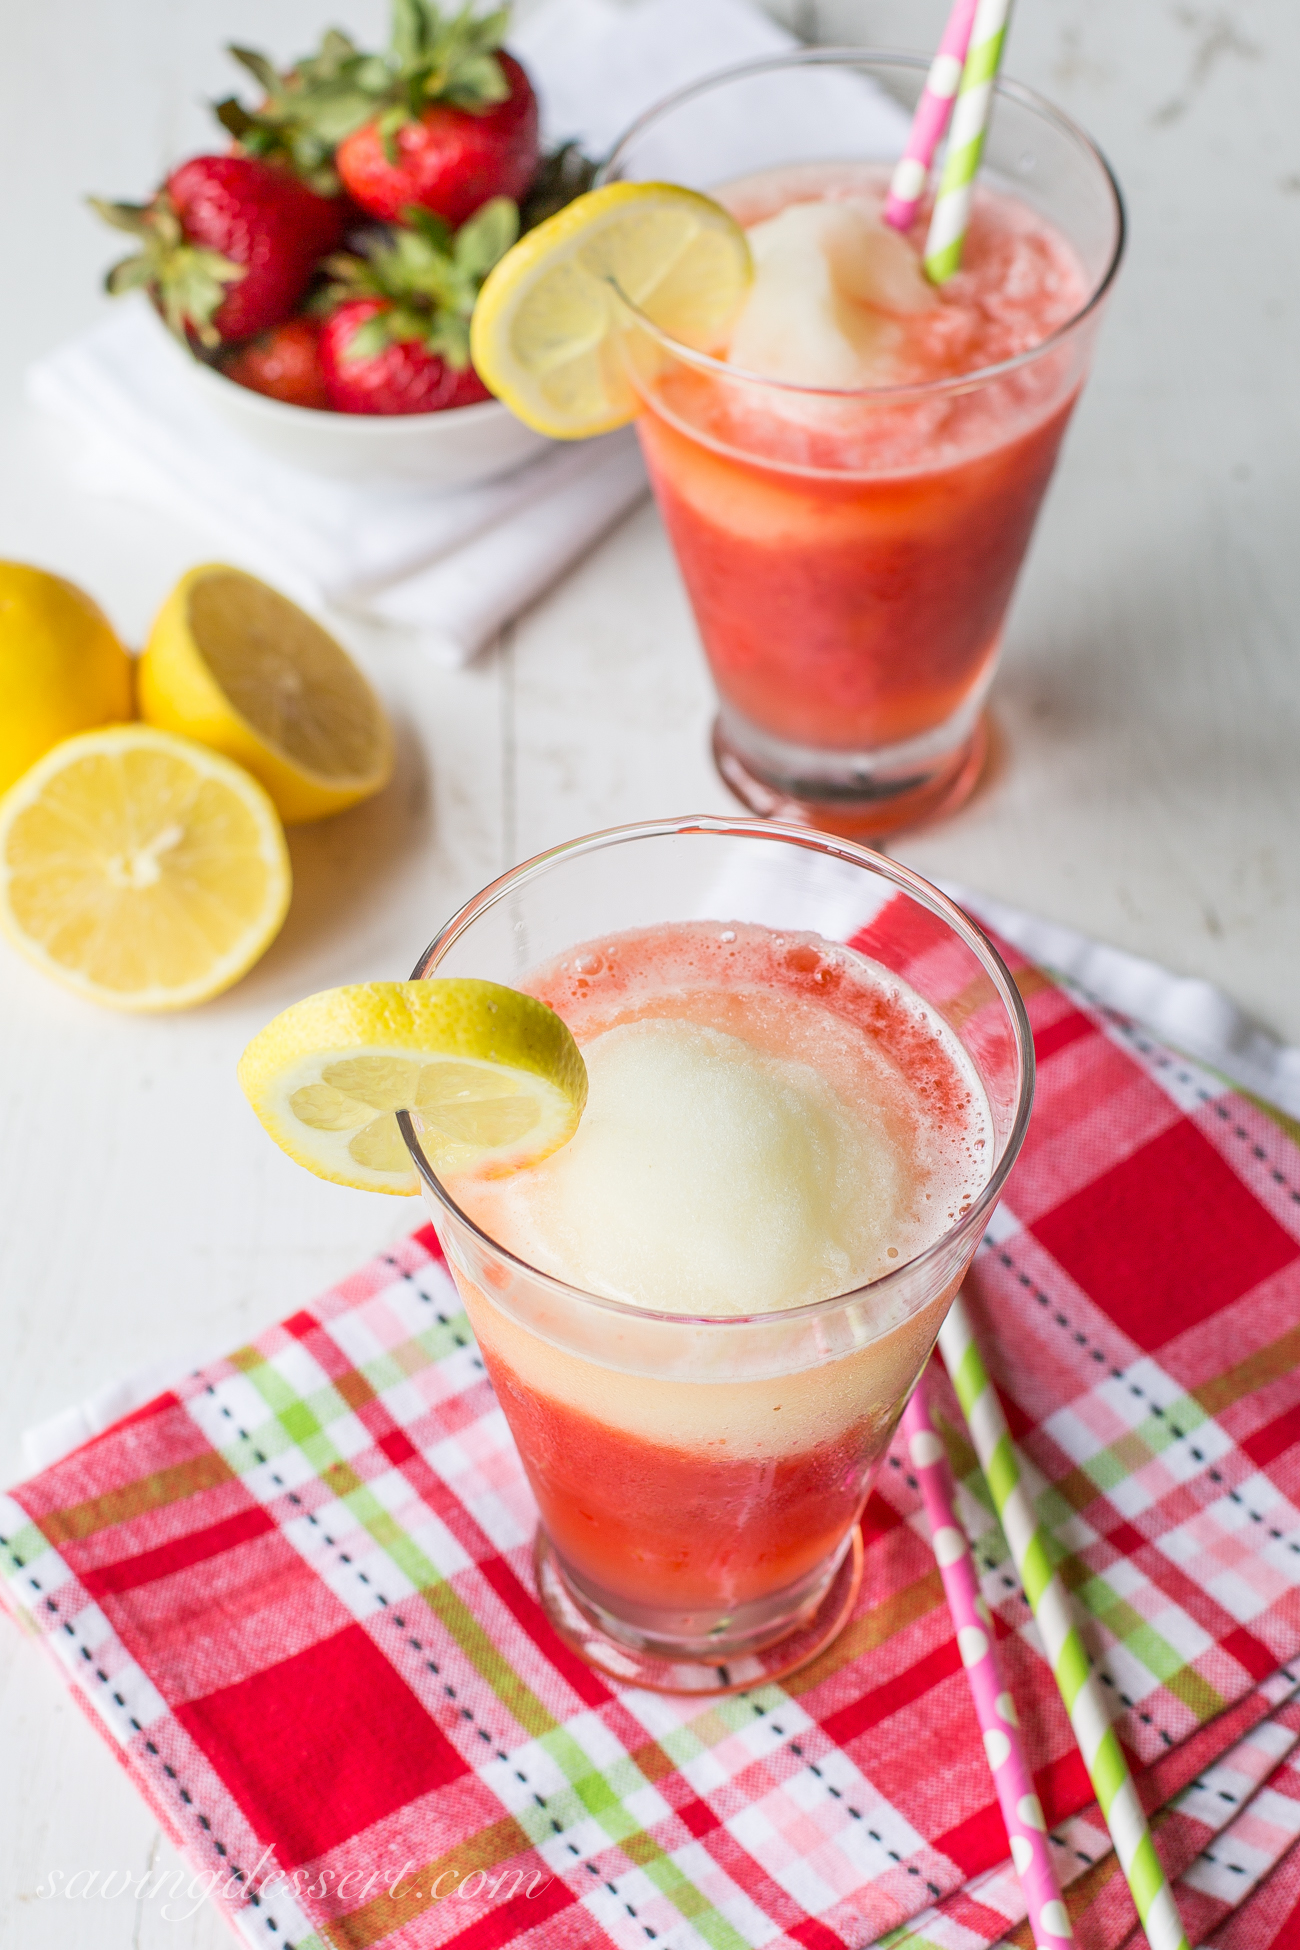 Frozen Strawberry Lemonade from Saving Dessert- featured on The Best Lemonade Recipes by cravingsofalunatic.com- Spend your summer sipping all The Best Lemonade Recipes you can get your hands on. Summer is all about refreshing beverages so make the most of it!